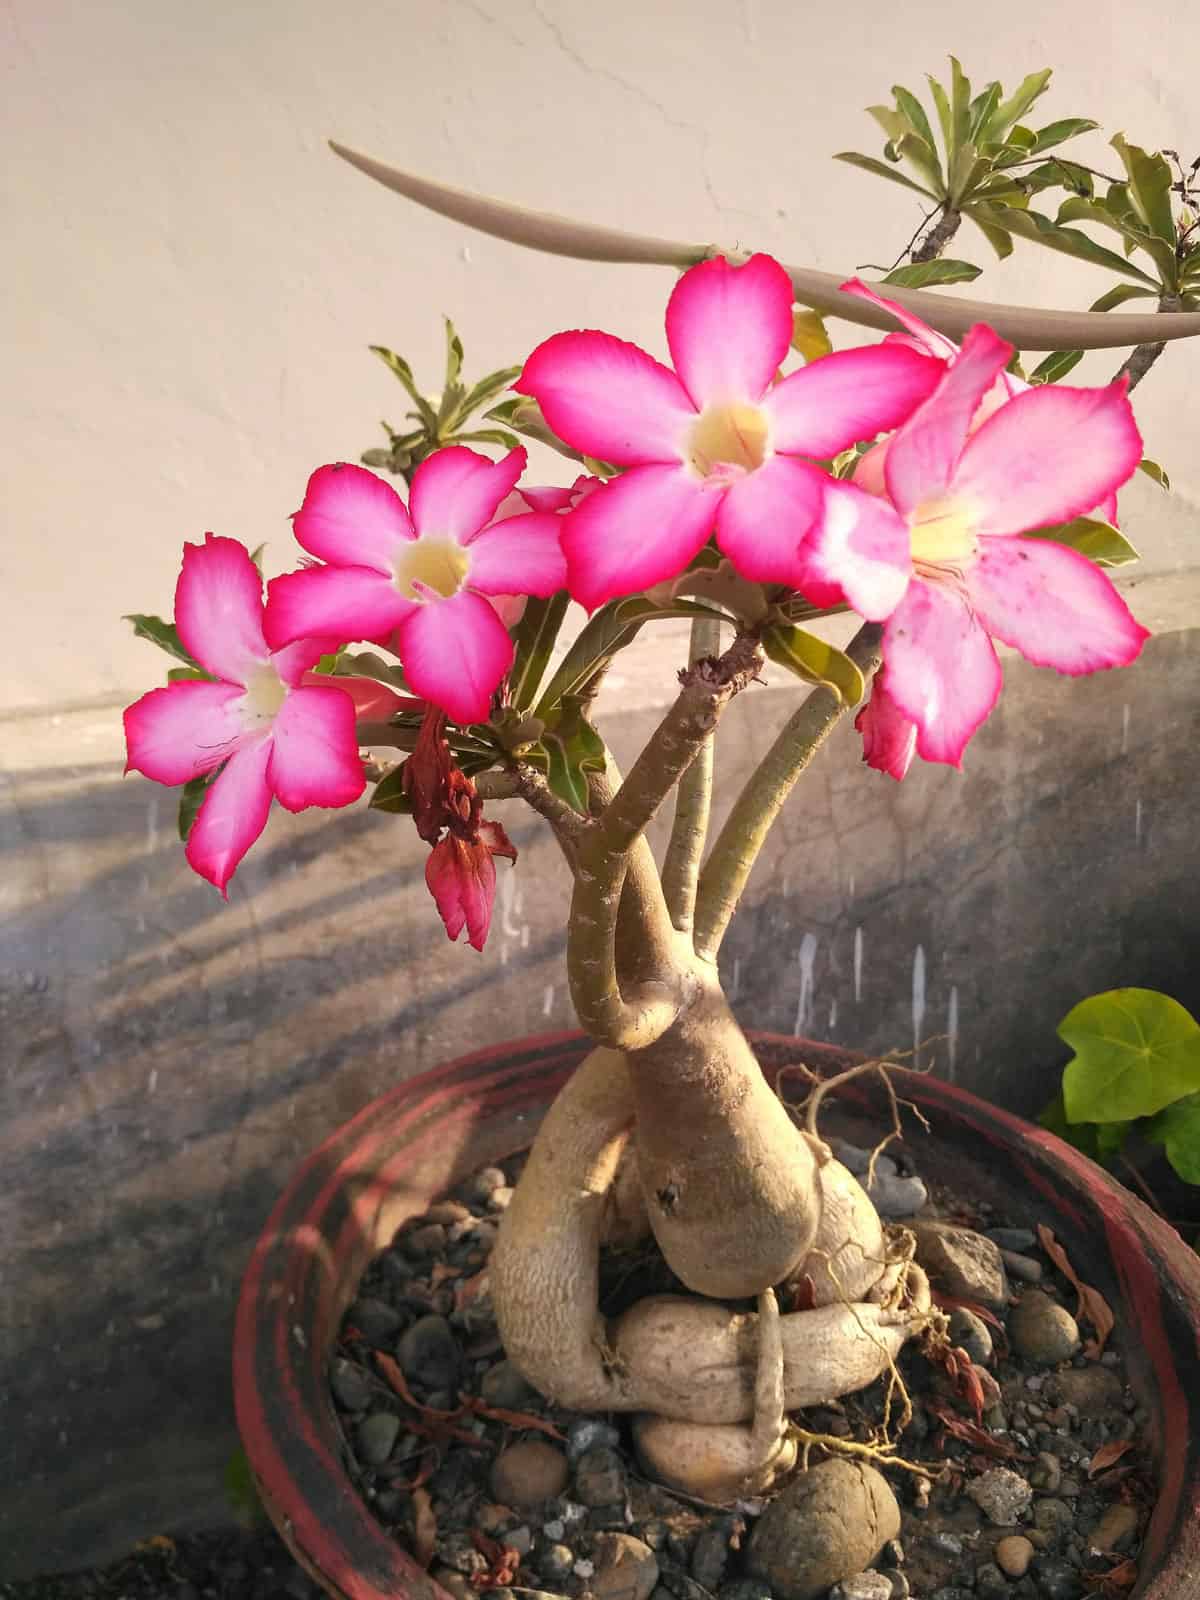 Bright pink flowers of a Desert Rose plant